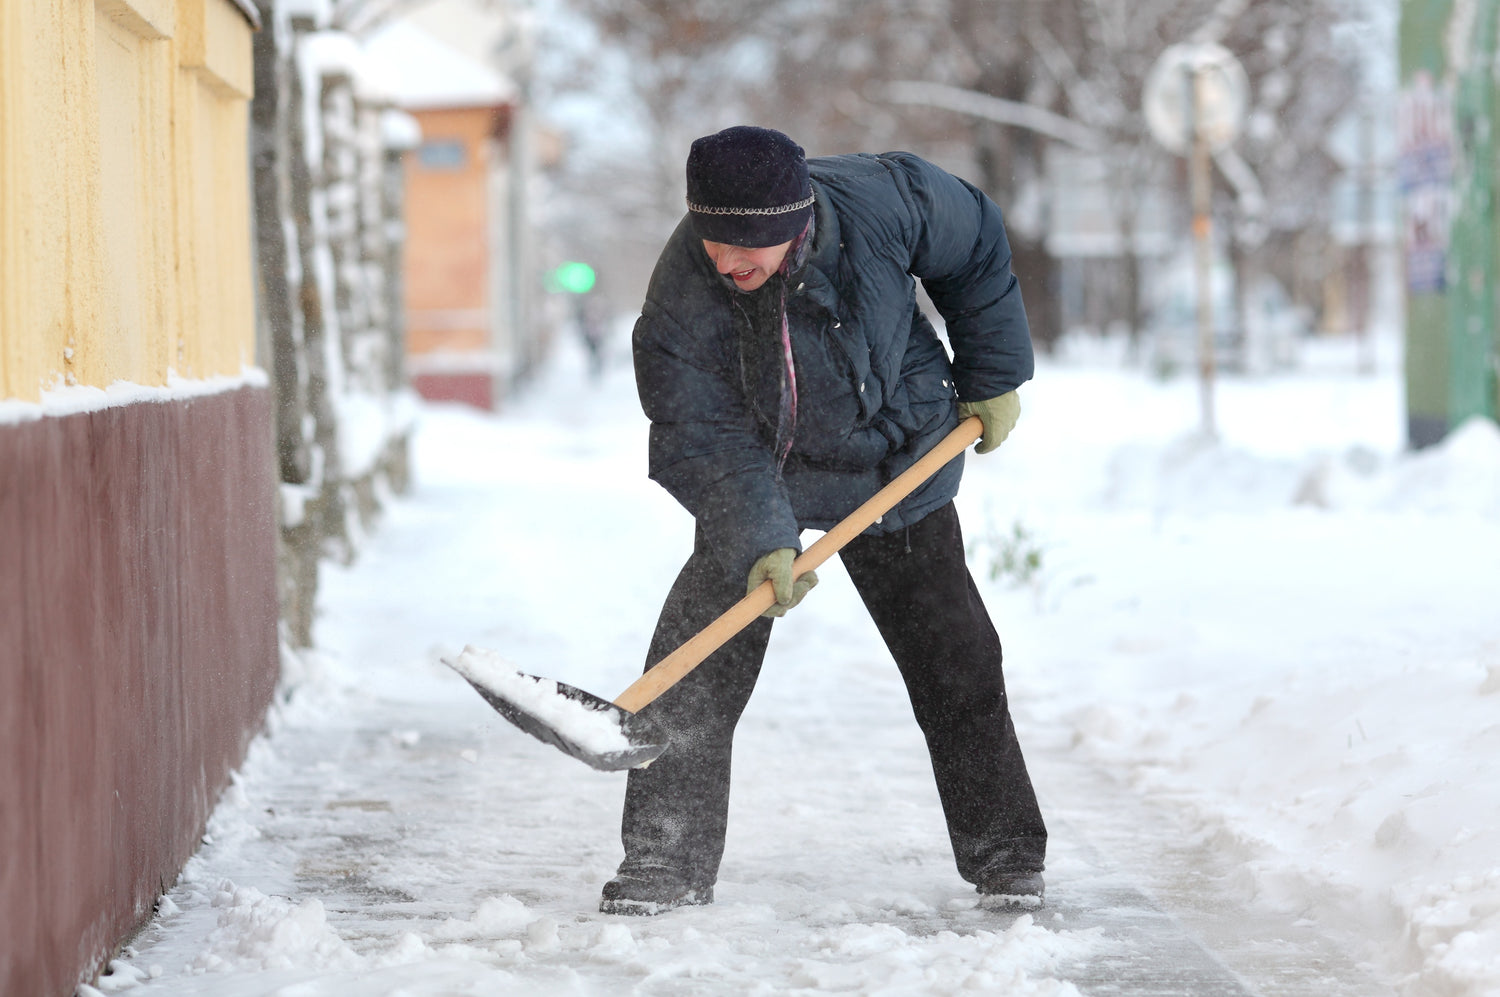 The Most Common Snow Shoveling Injuries